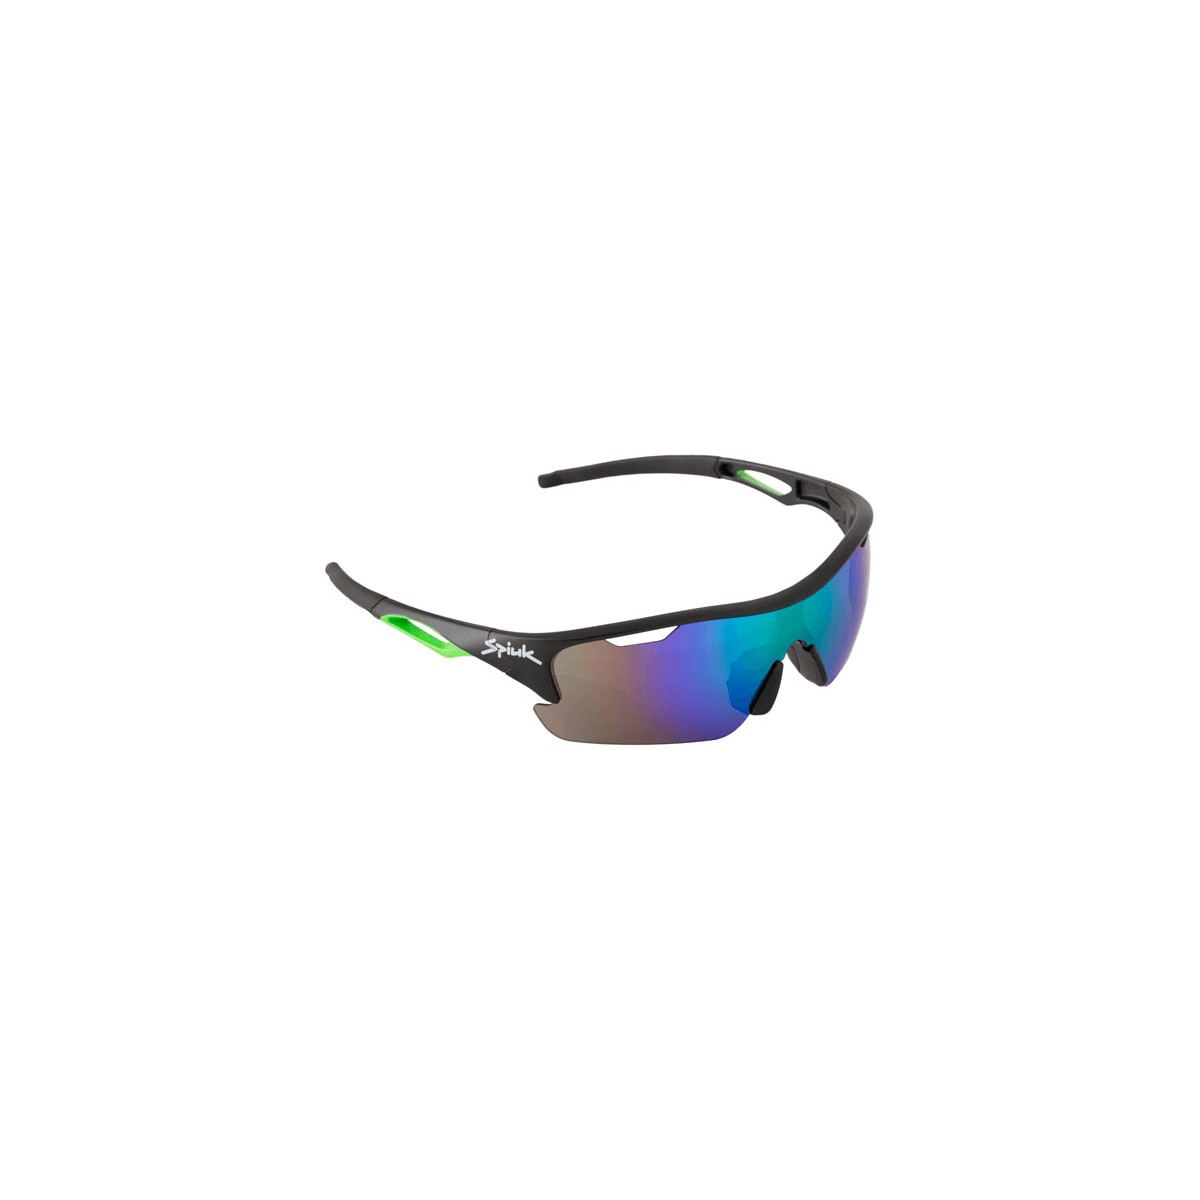 Spiuk Jifter Cycling Glasses Yellow / Black Green Mirror Lenses